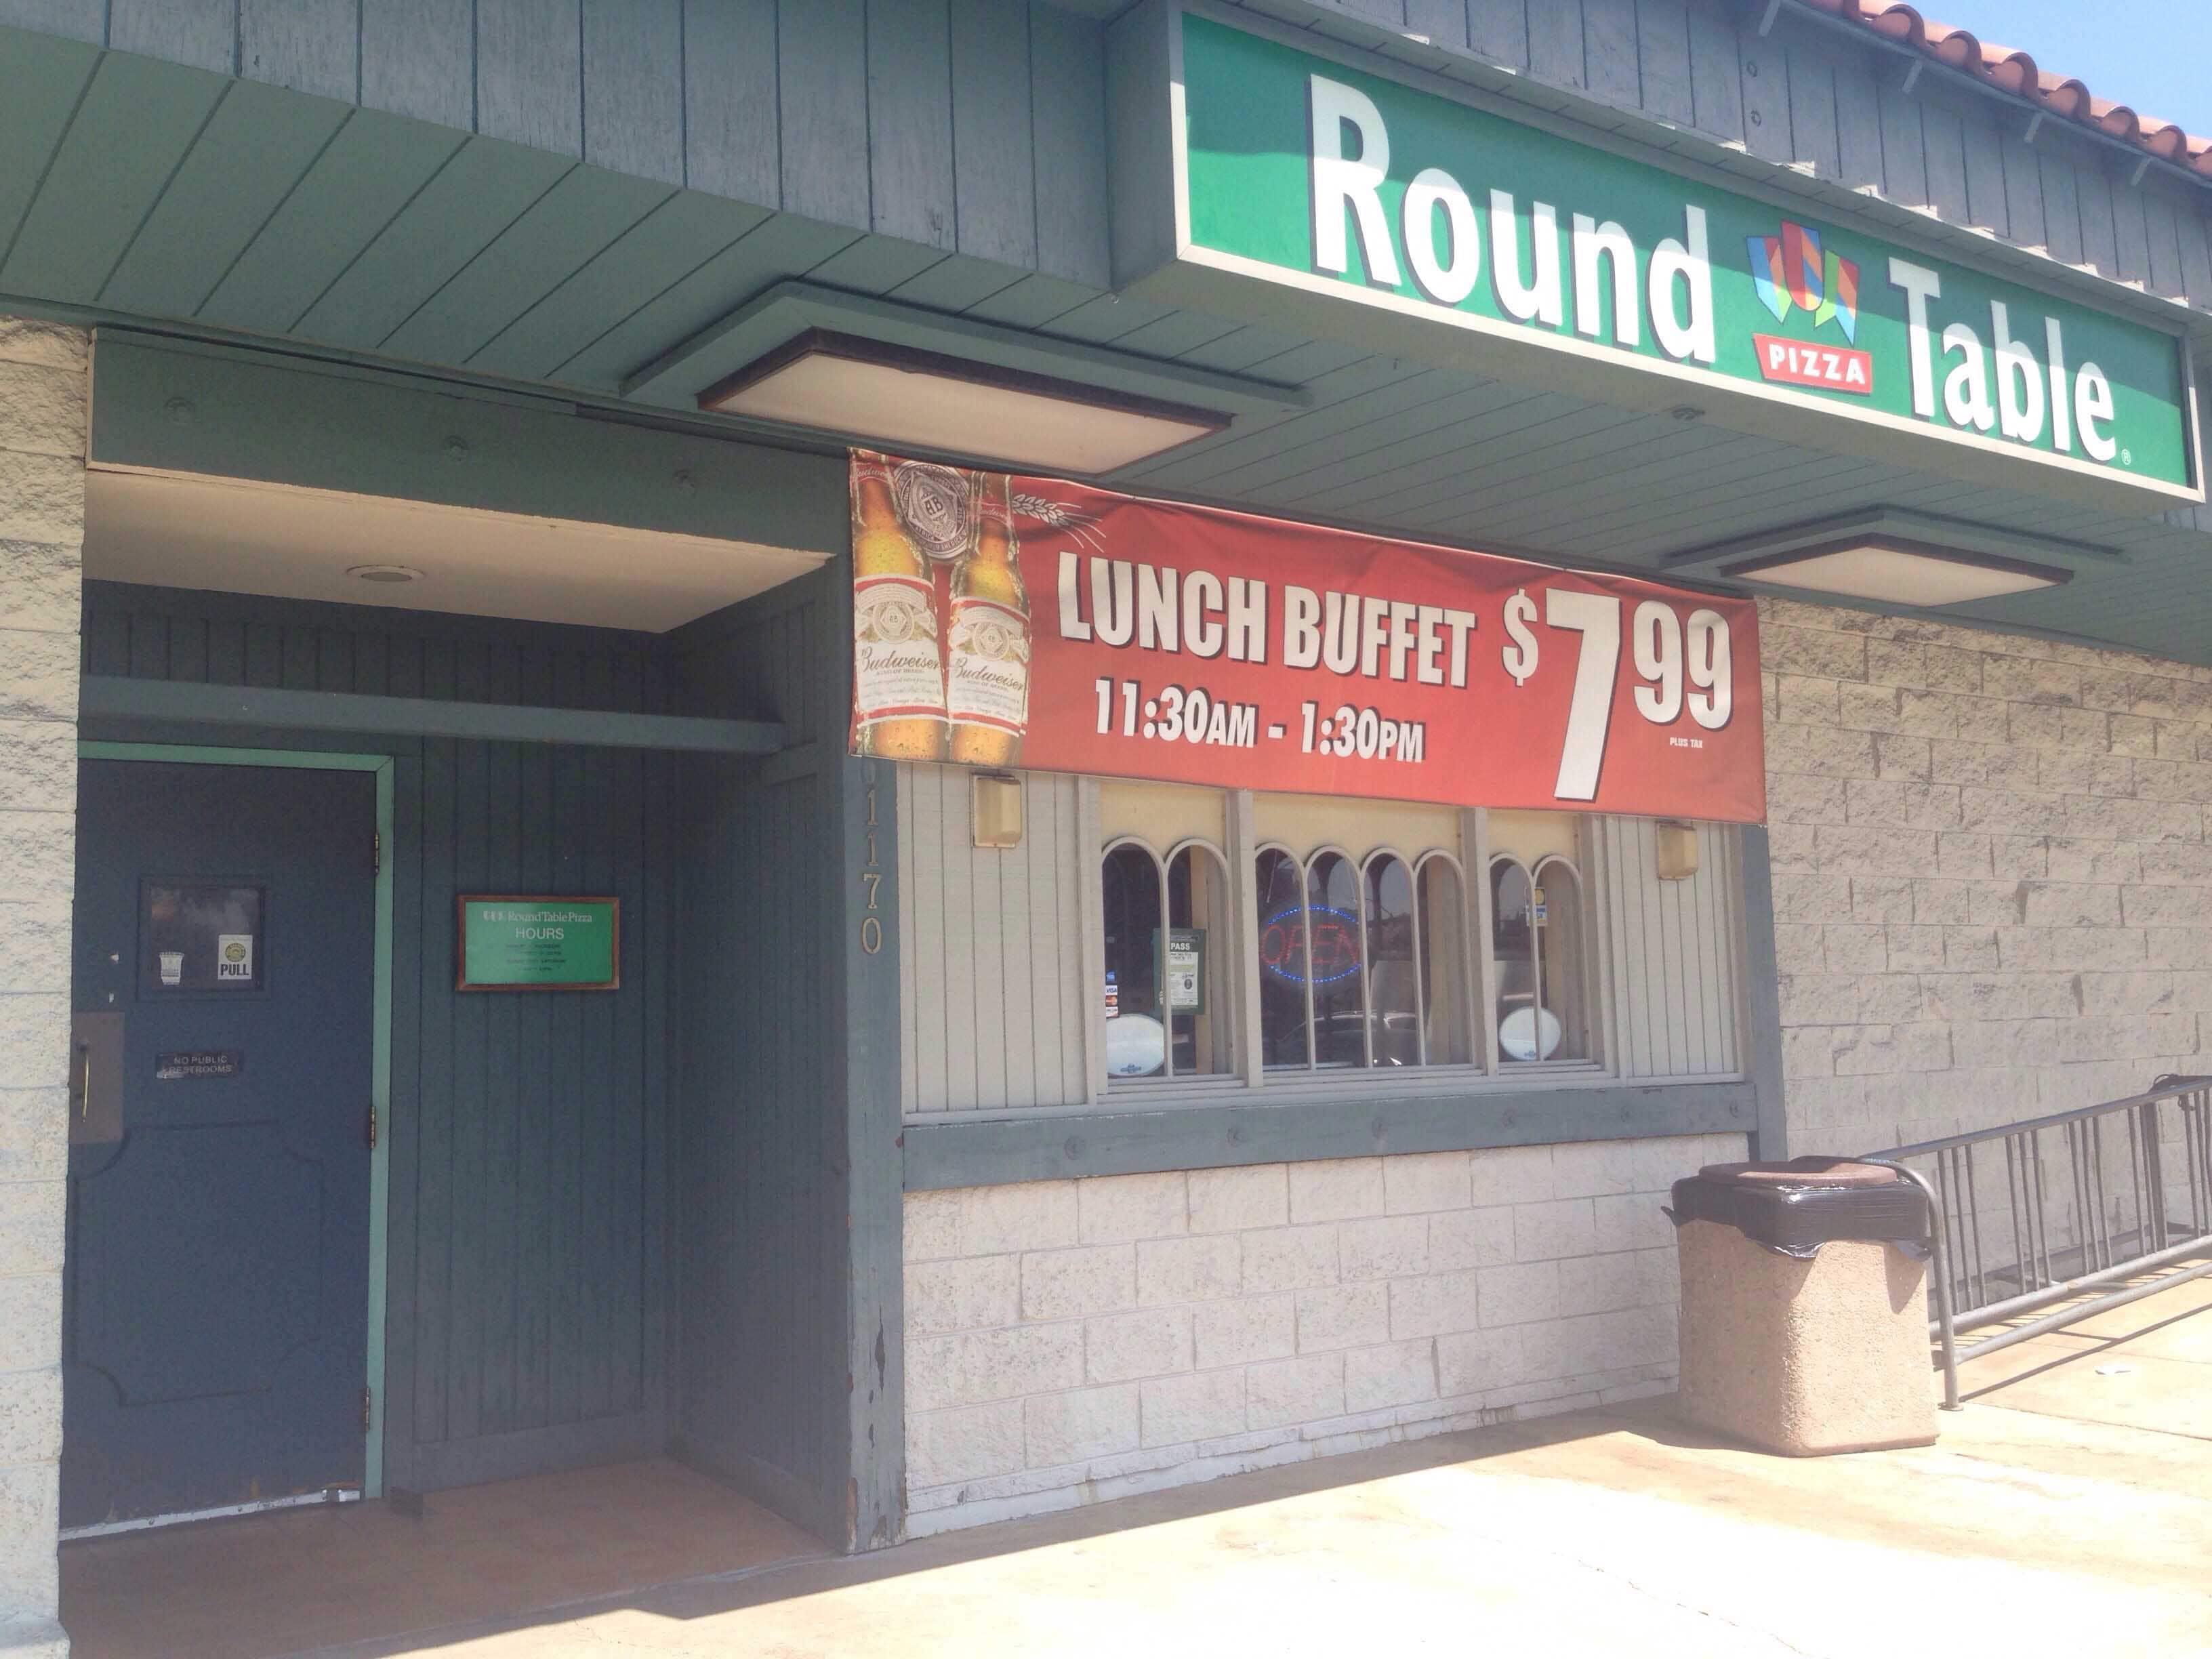 Round Table Pizza Lunch Buffet Near Me - Latest Buffet Ideas